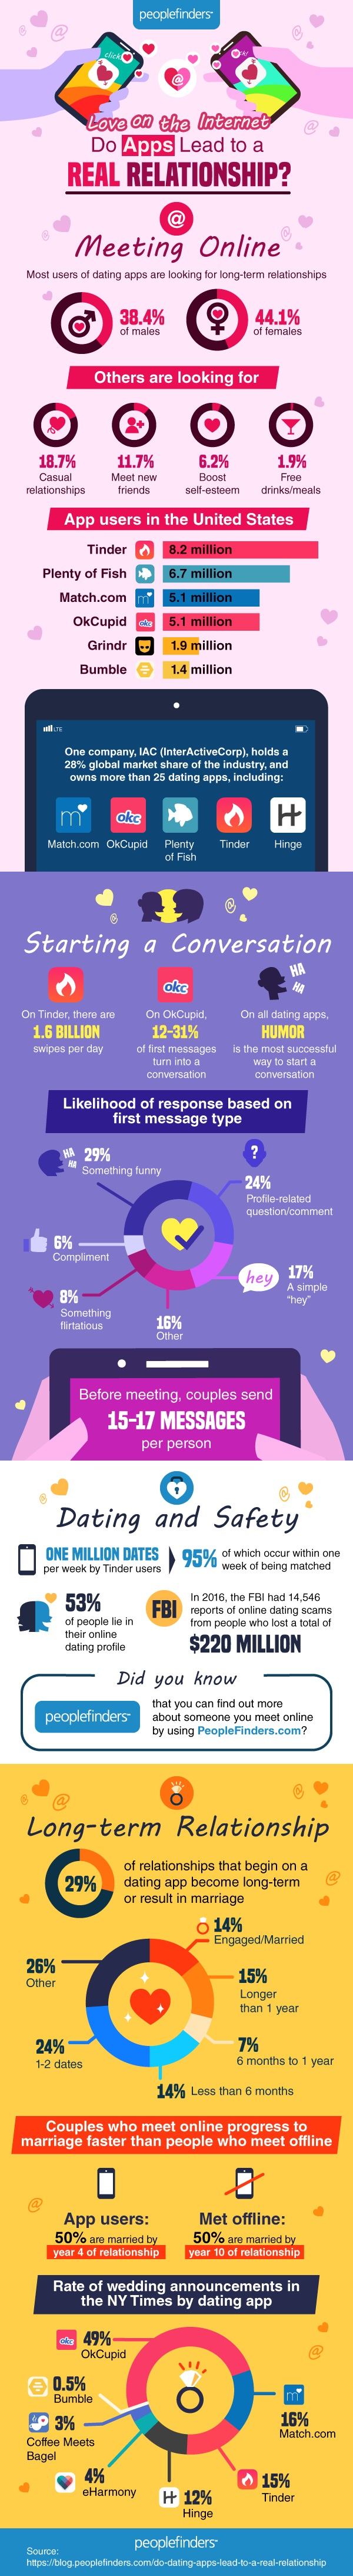 Love on the Internet: Do Apps Lead to a Real Relationship? #infographic #Relationship #infographics